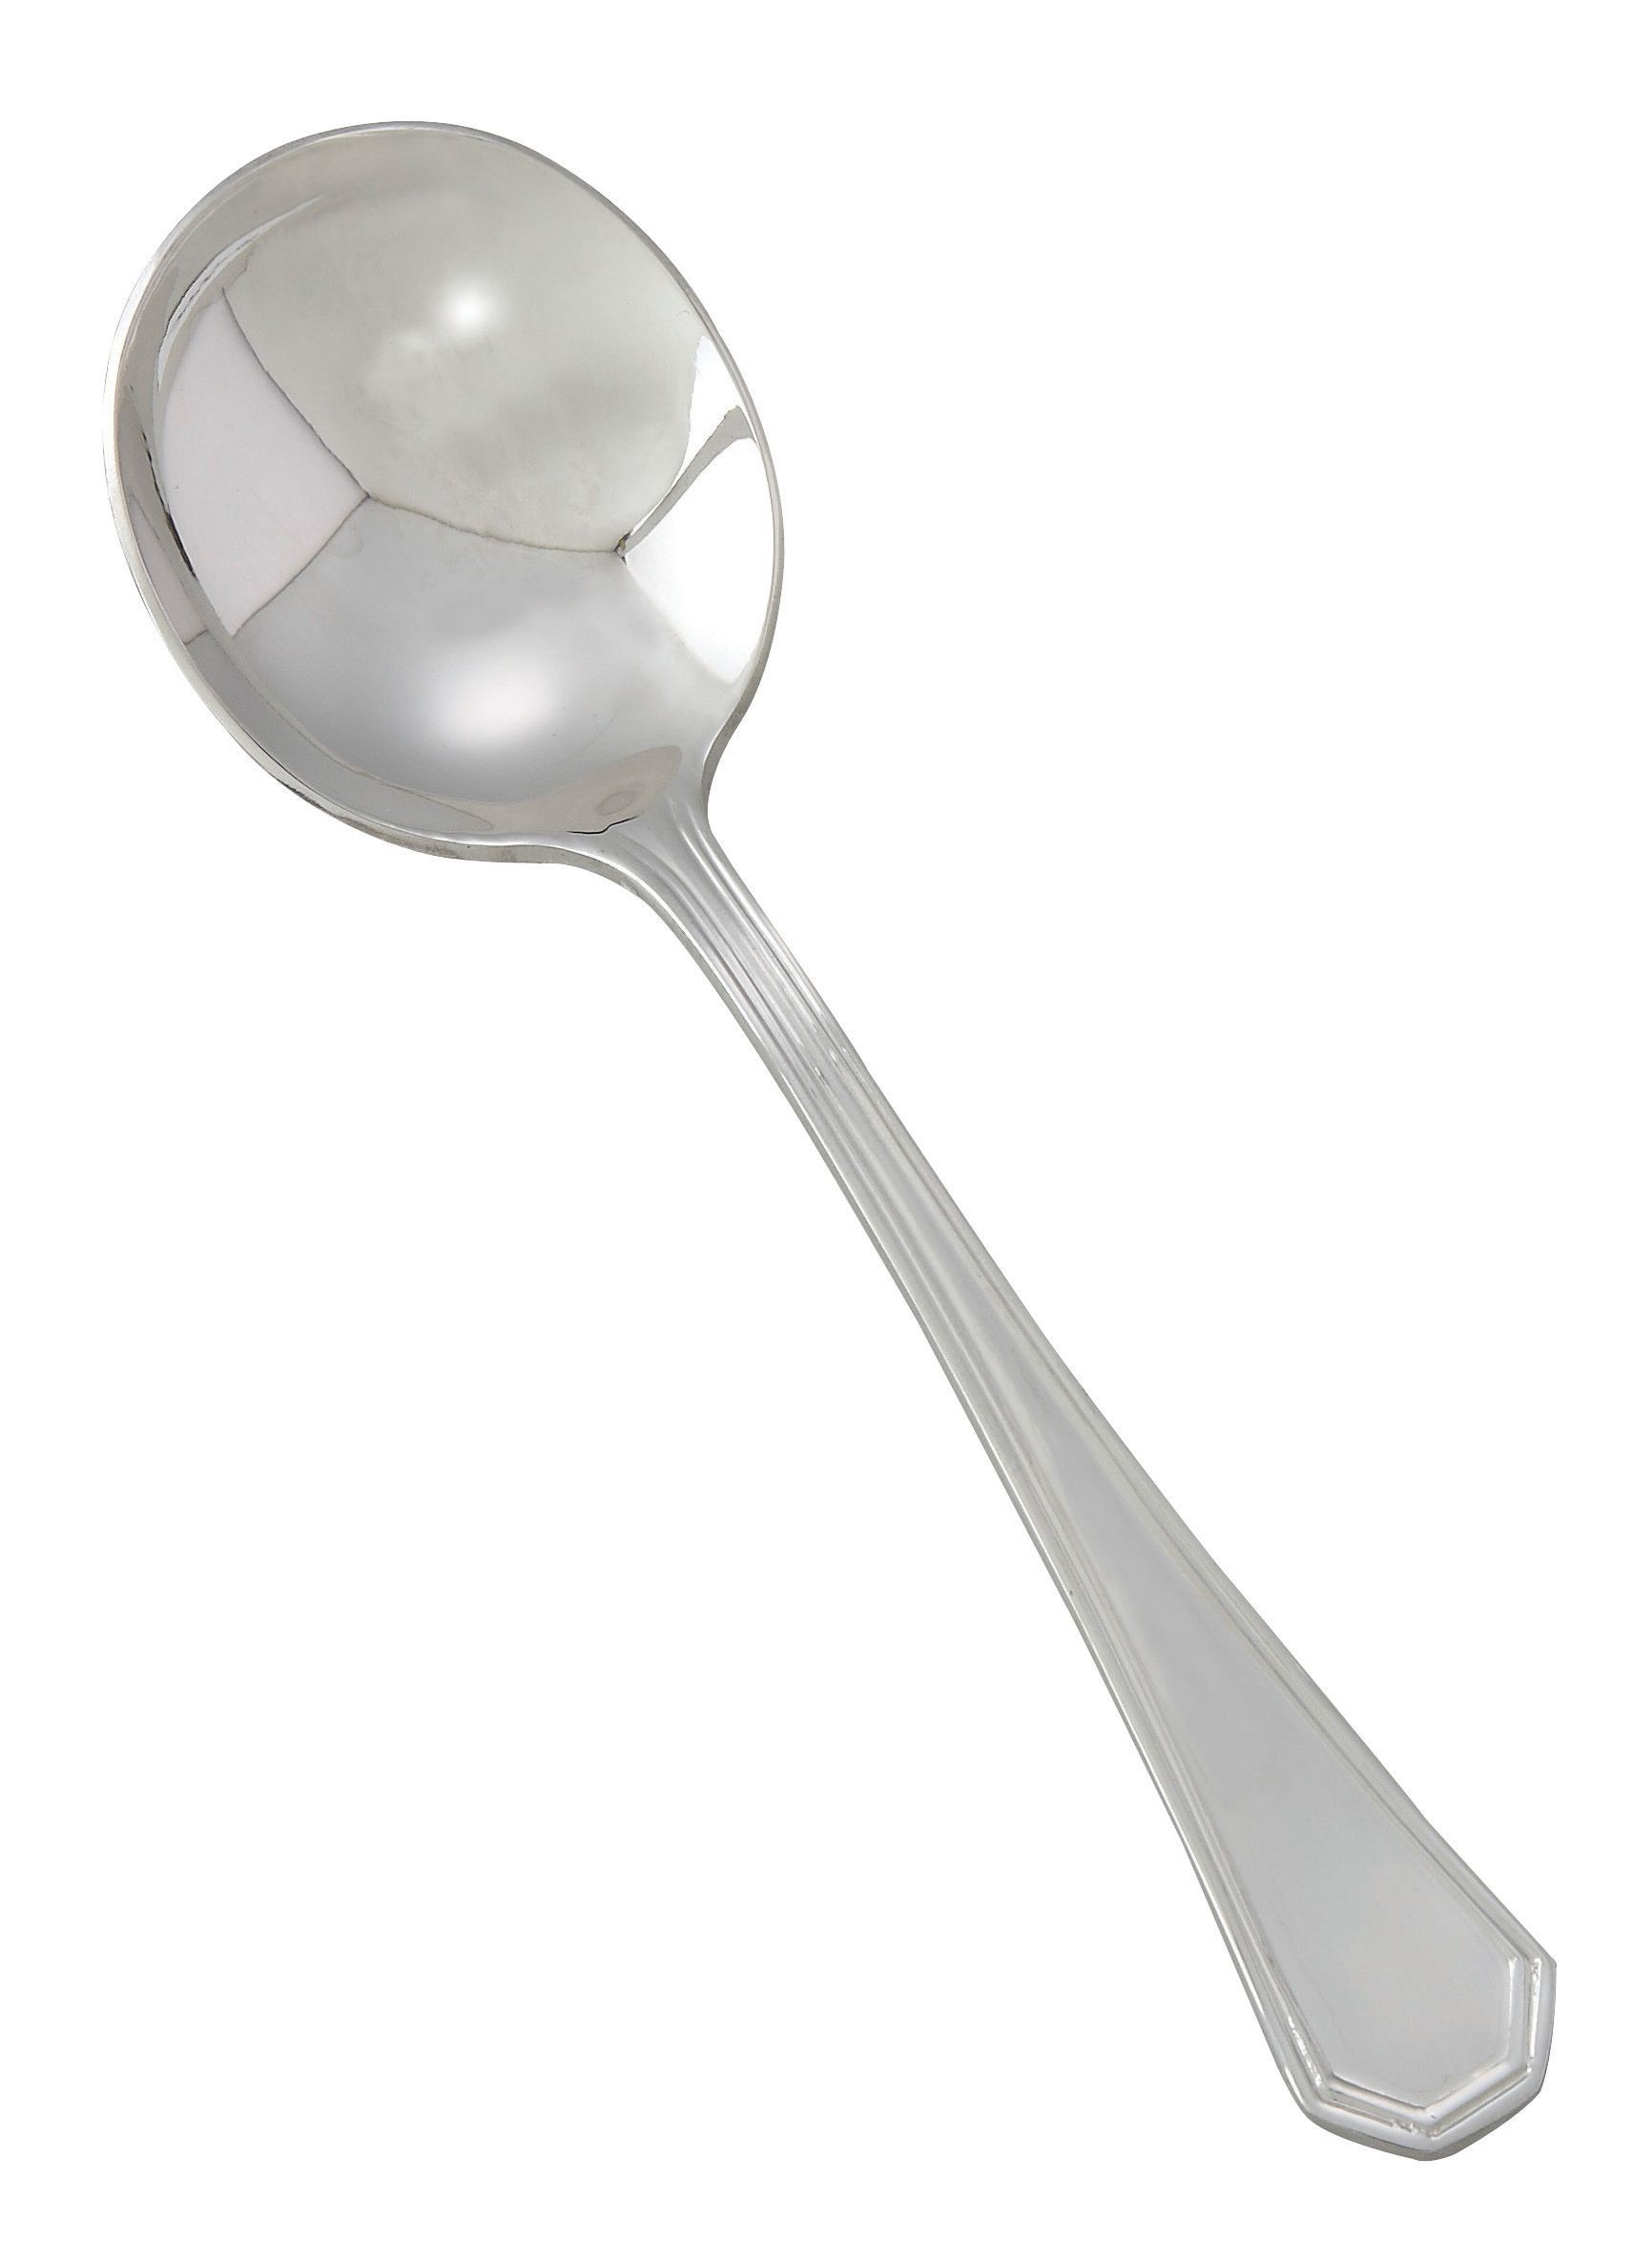 Winco 0035-04 Victoria Extra Heavy Stainless Steel Bouillon Spoon (12/Pack)